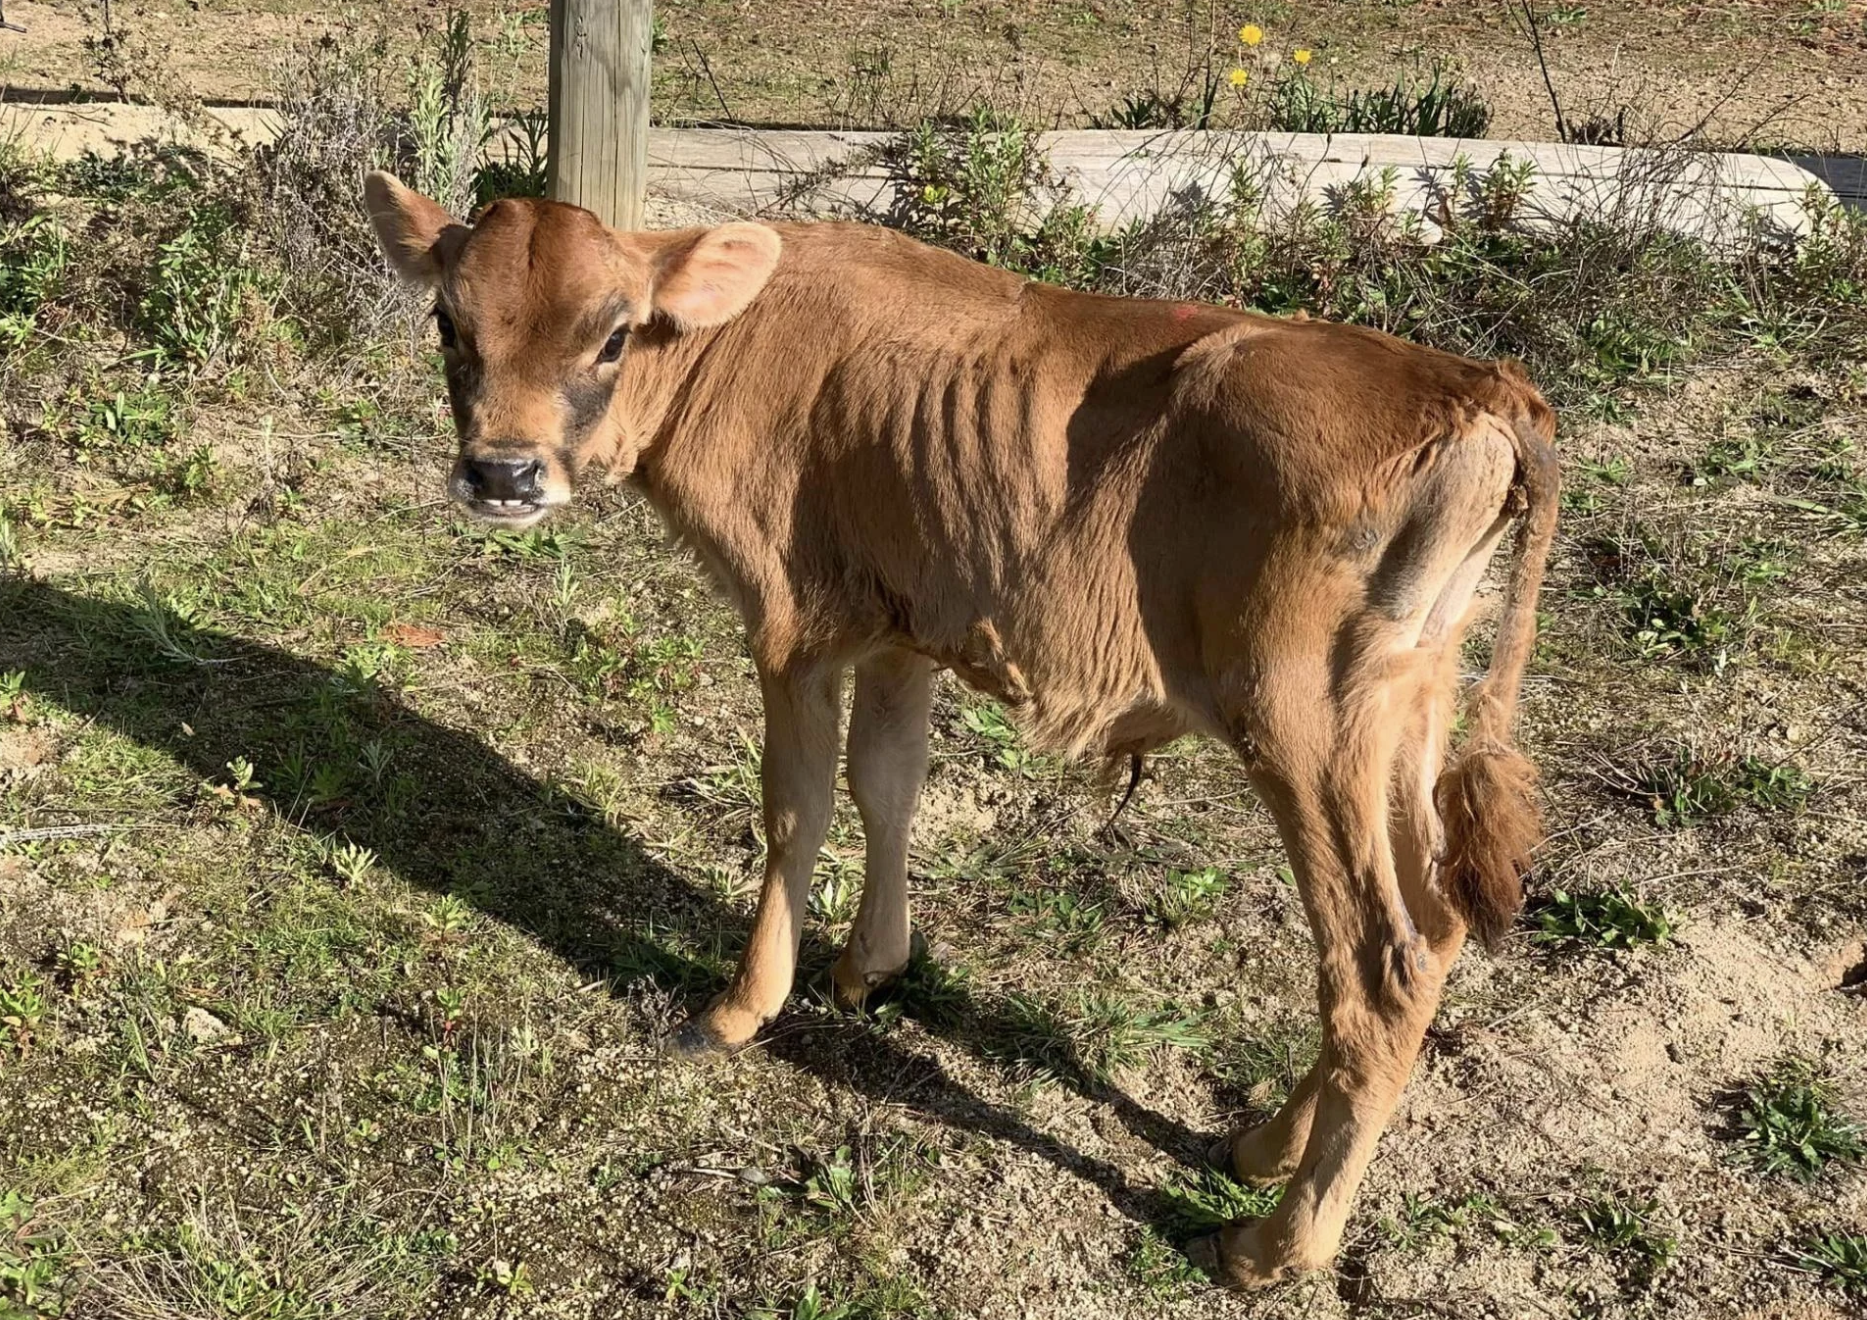 A young brown calf standing in a field with sparse grass and a fence in the background